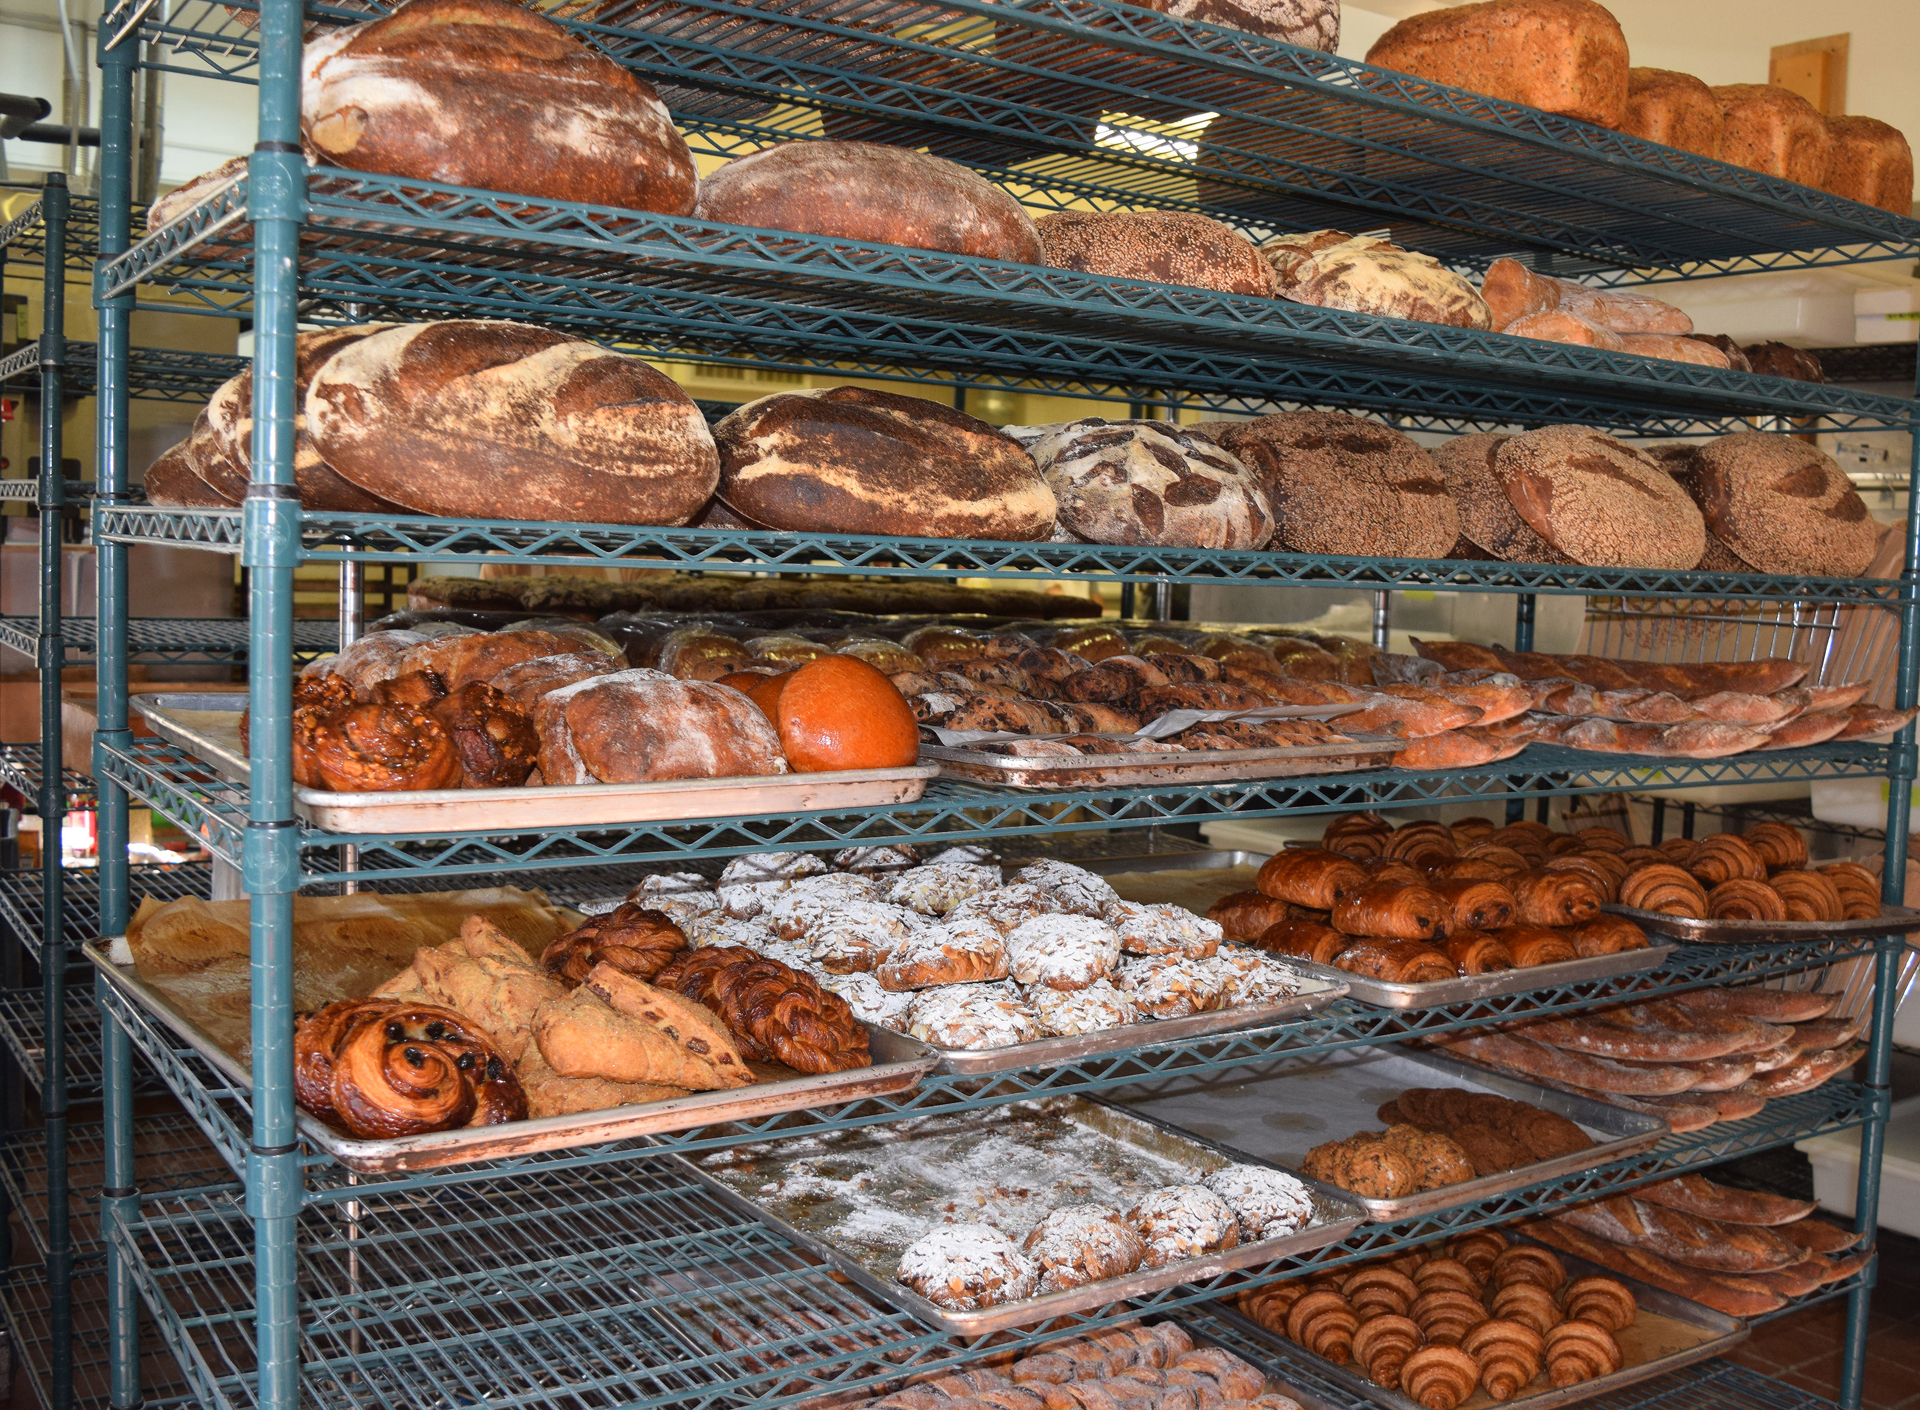 Shelves of breads and pastries inside the bakery door await morning customers.